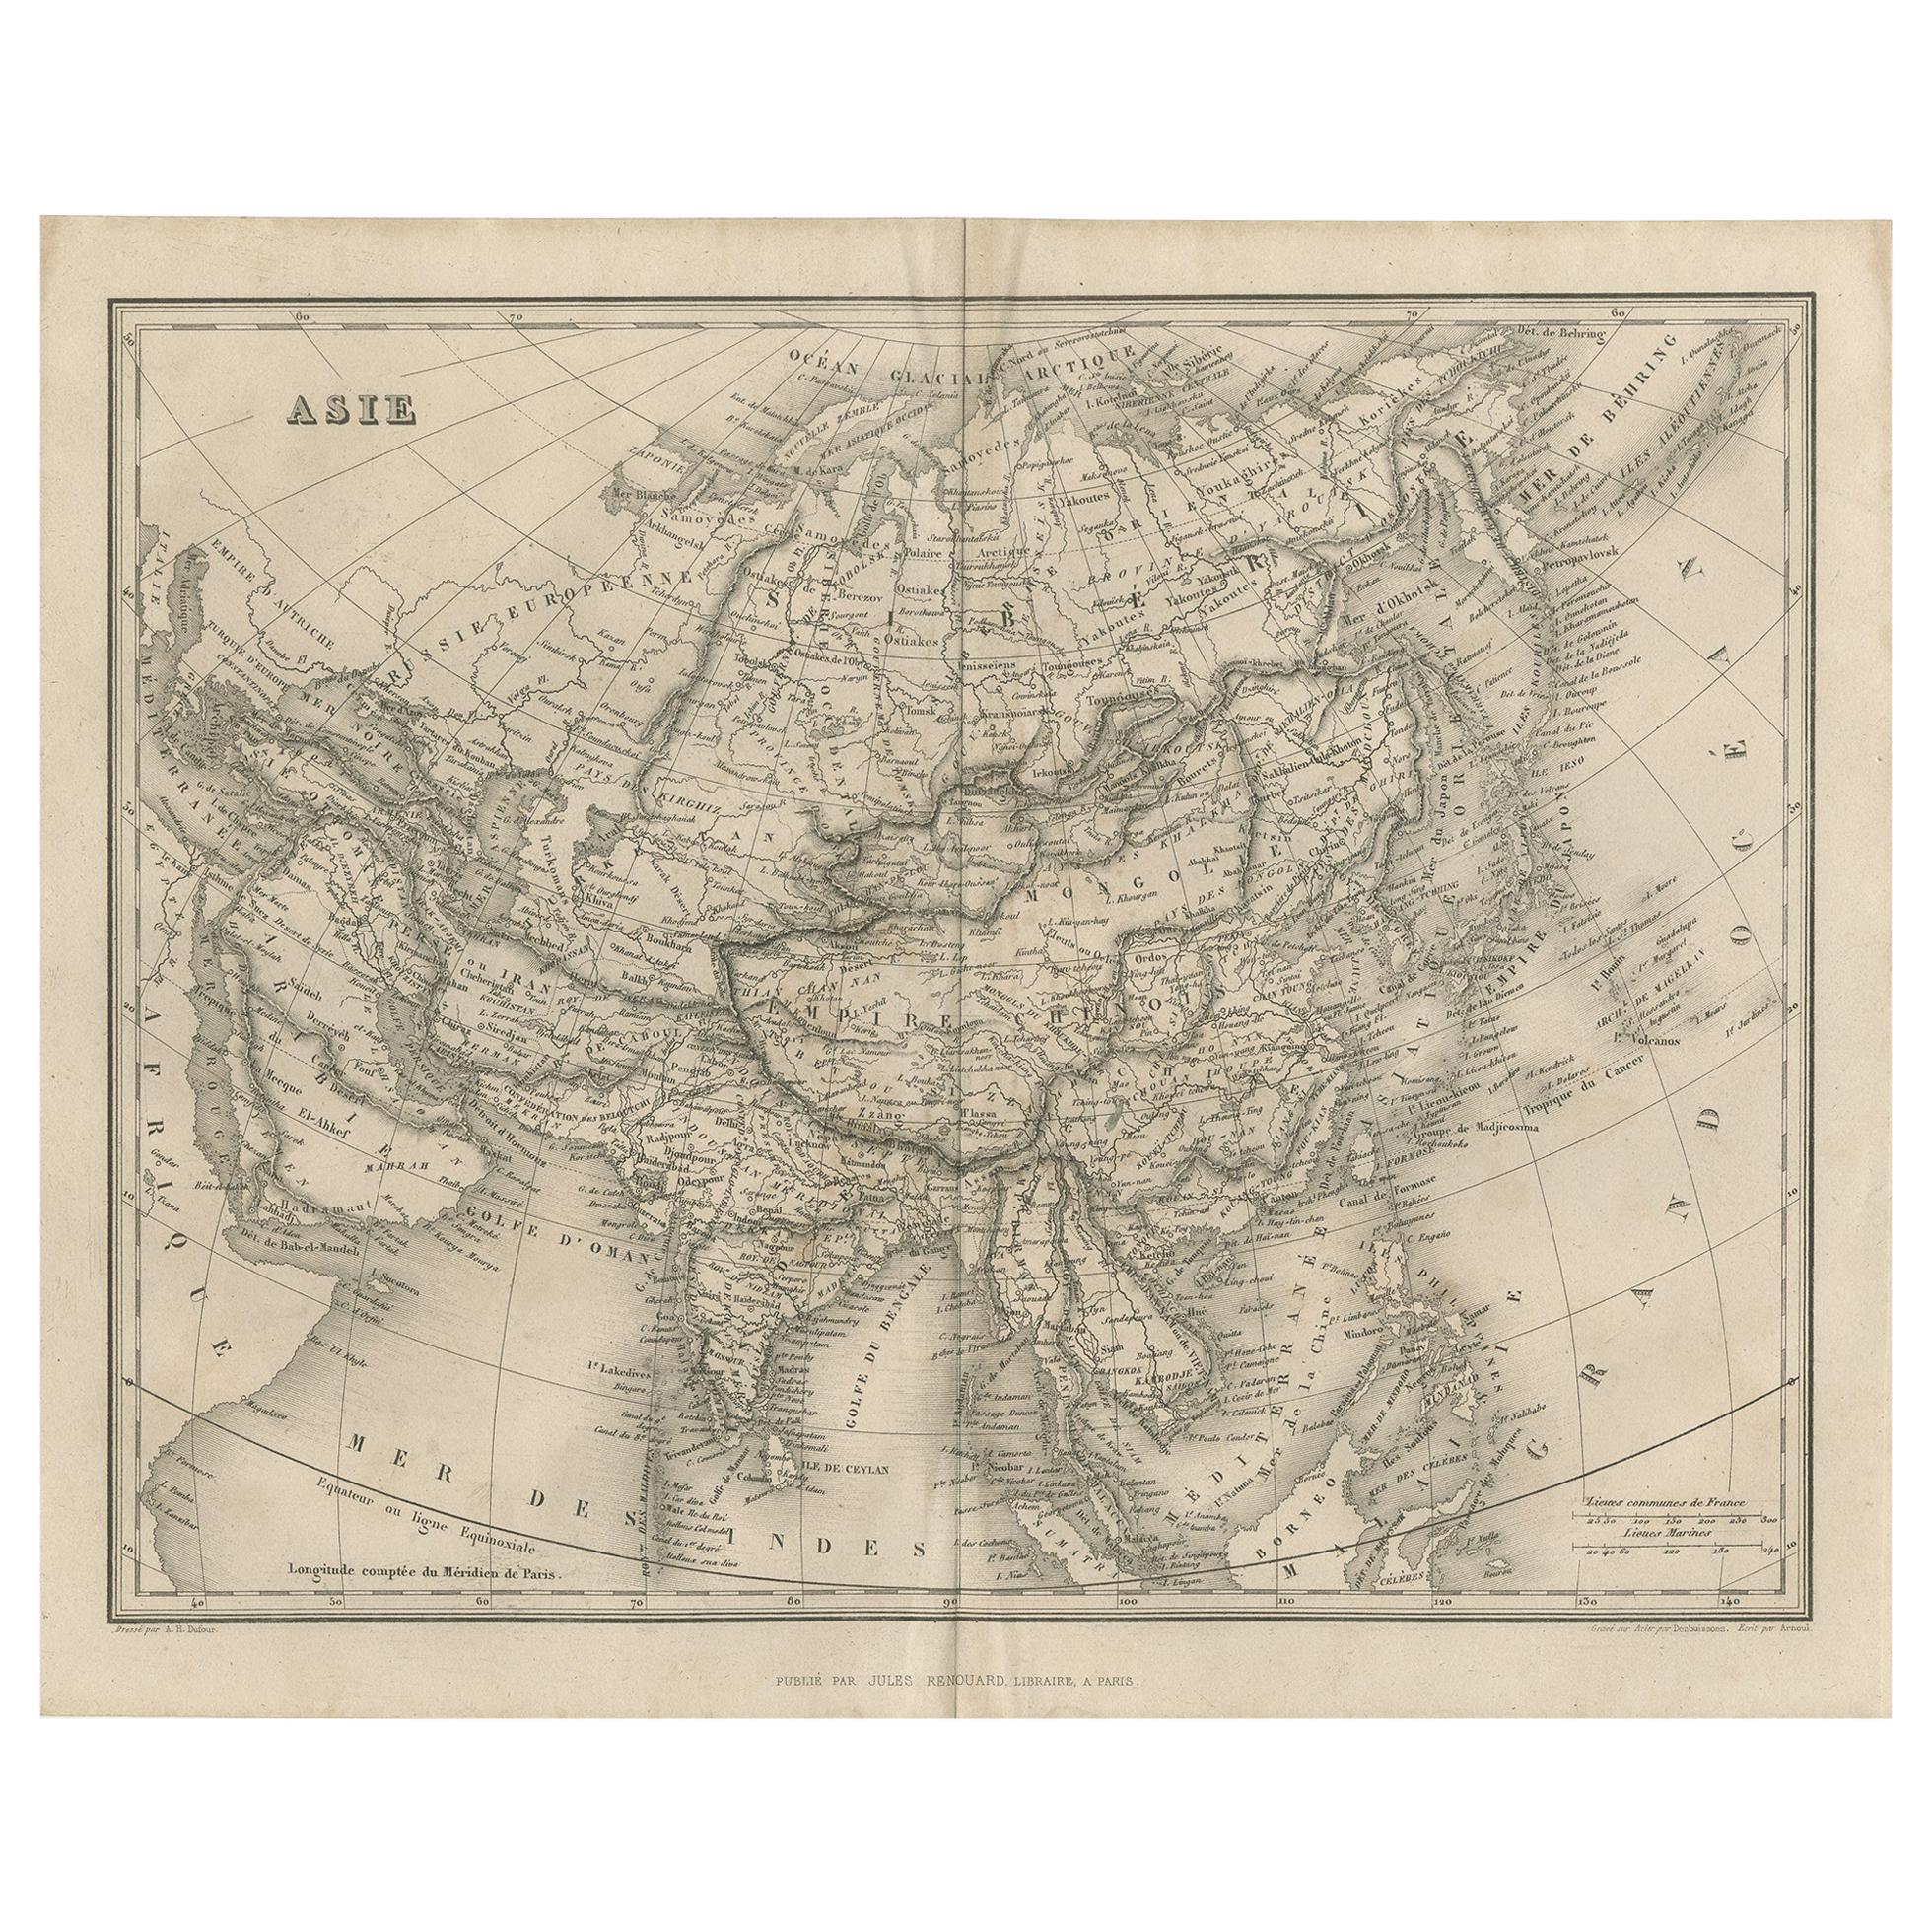 Antique Map of Asia by Balbi '1847'